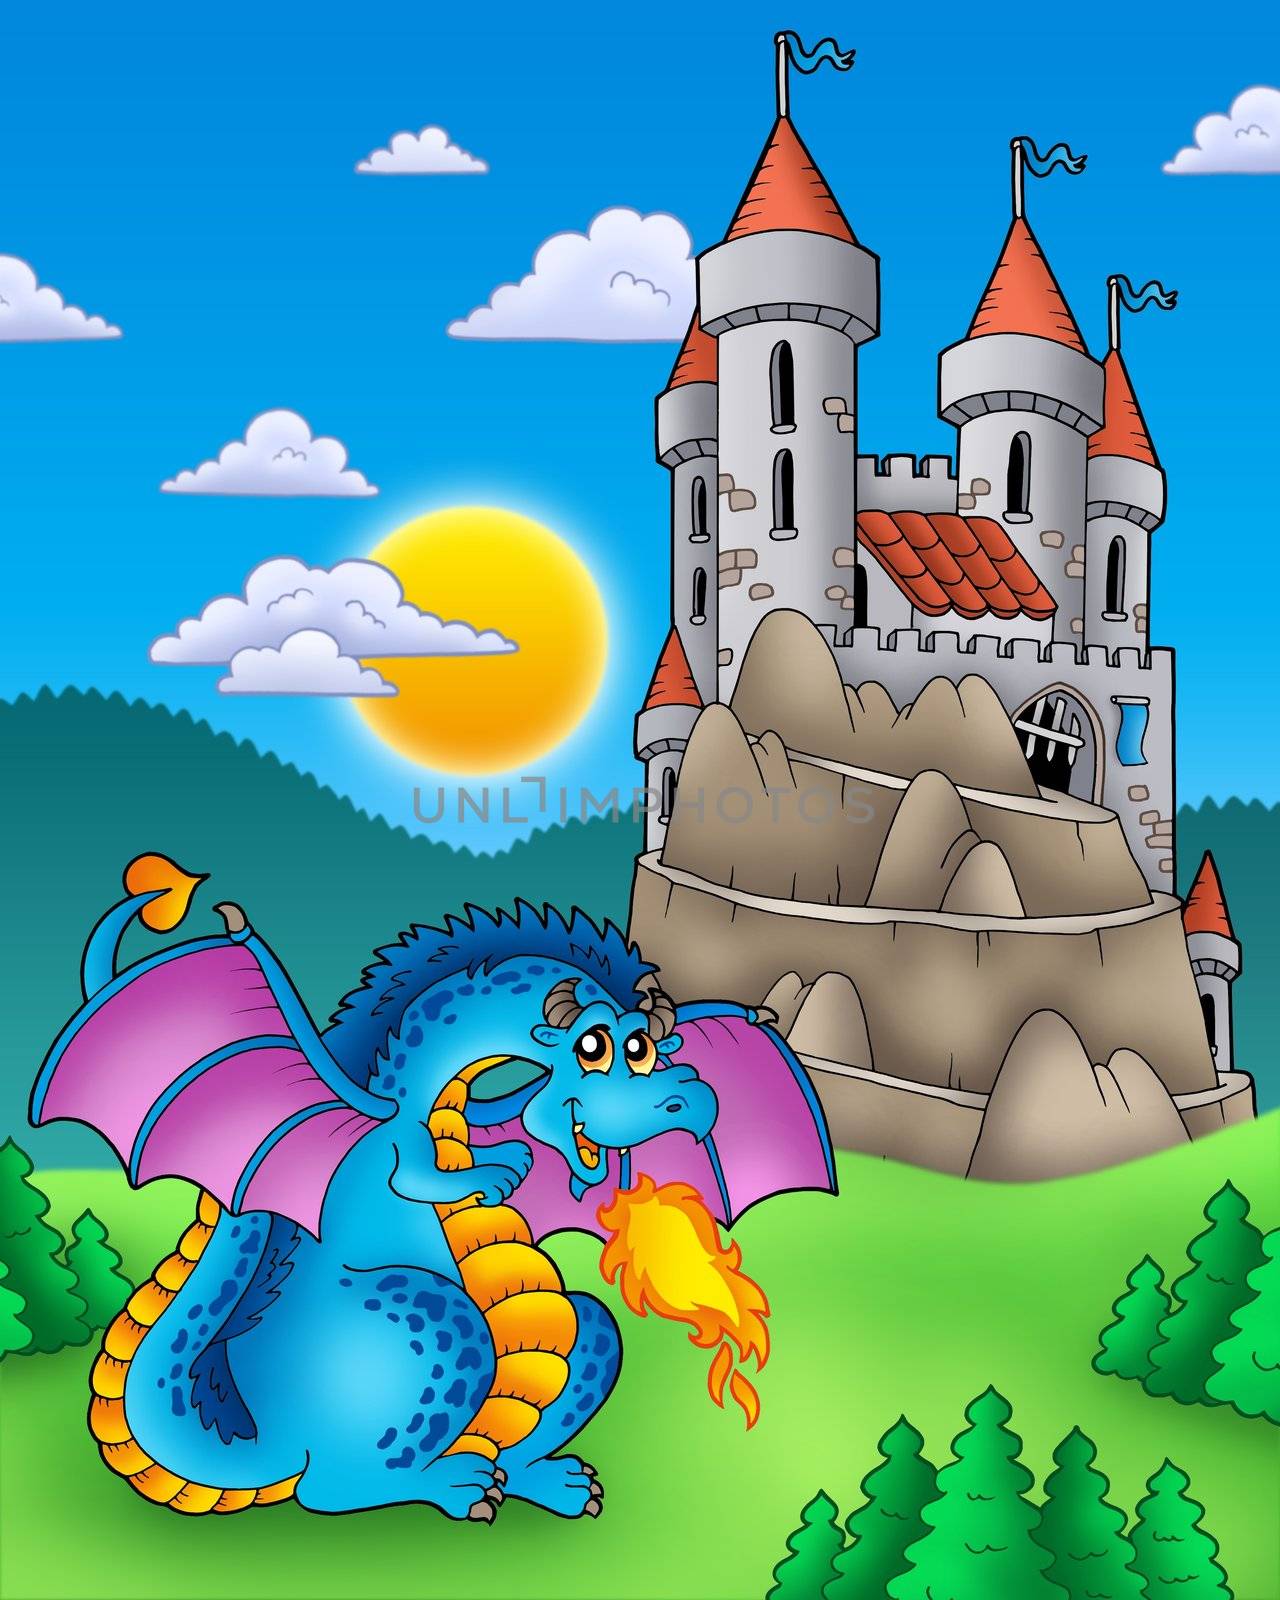 Blue dragon with castle on hill - color illustration.